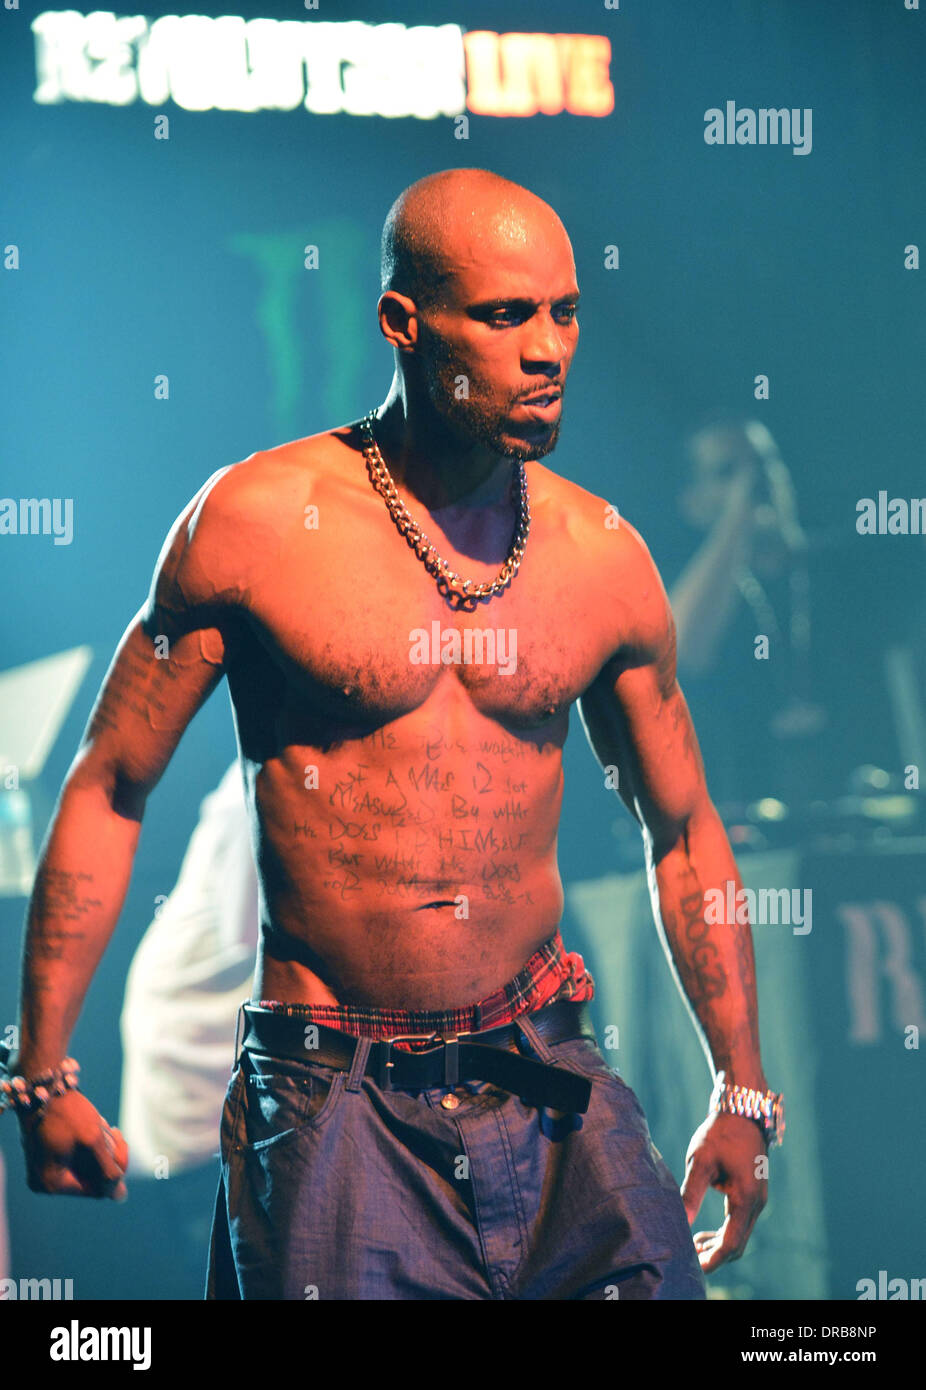 DMX performing live to promote his new CD 'Undisputed' at Revolution Live  Hollywood, Florida - 06.07.12 Stock Photo - Alamy